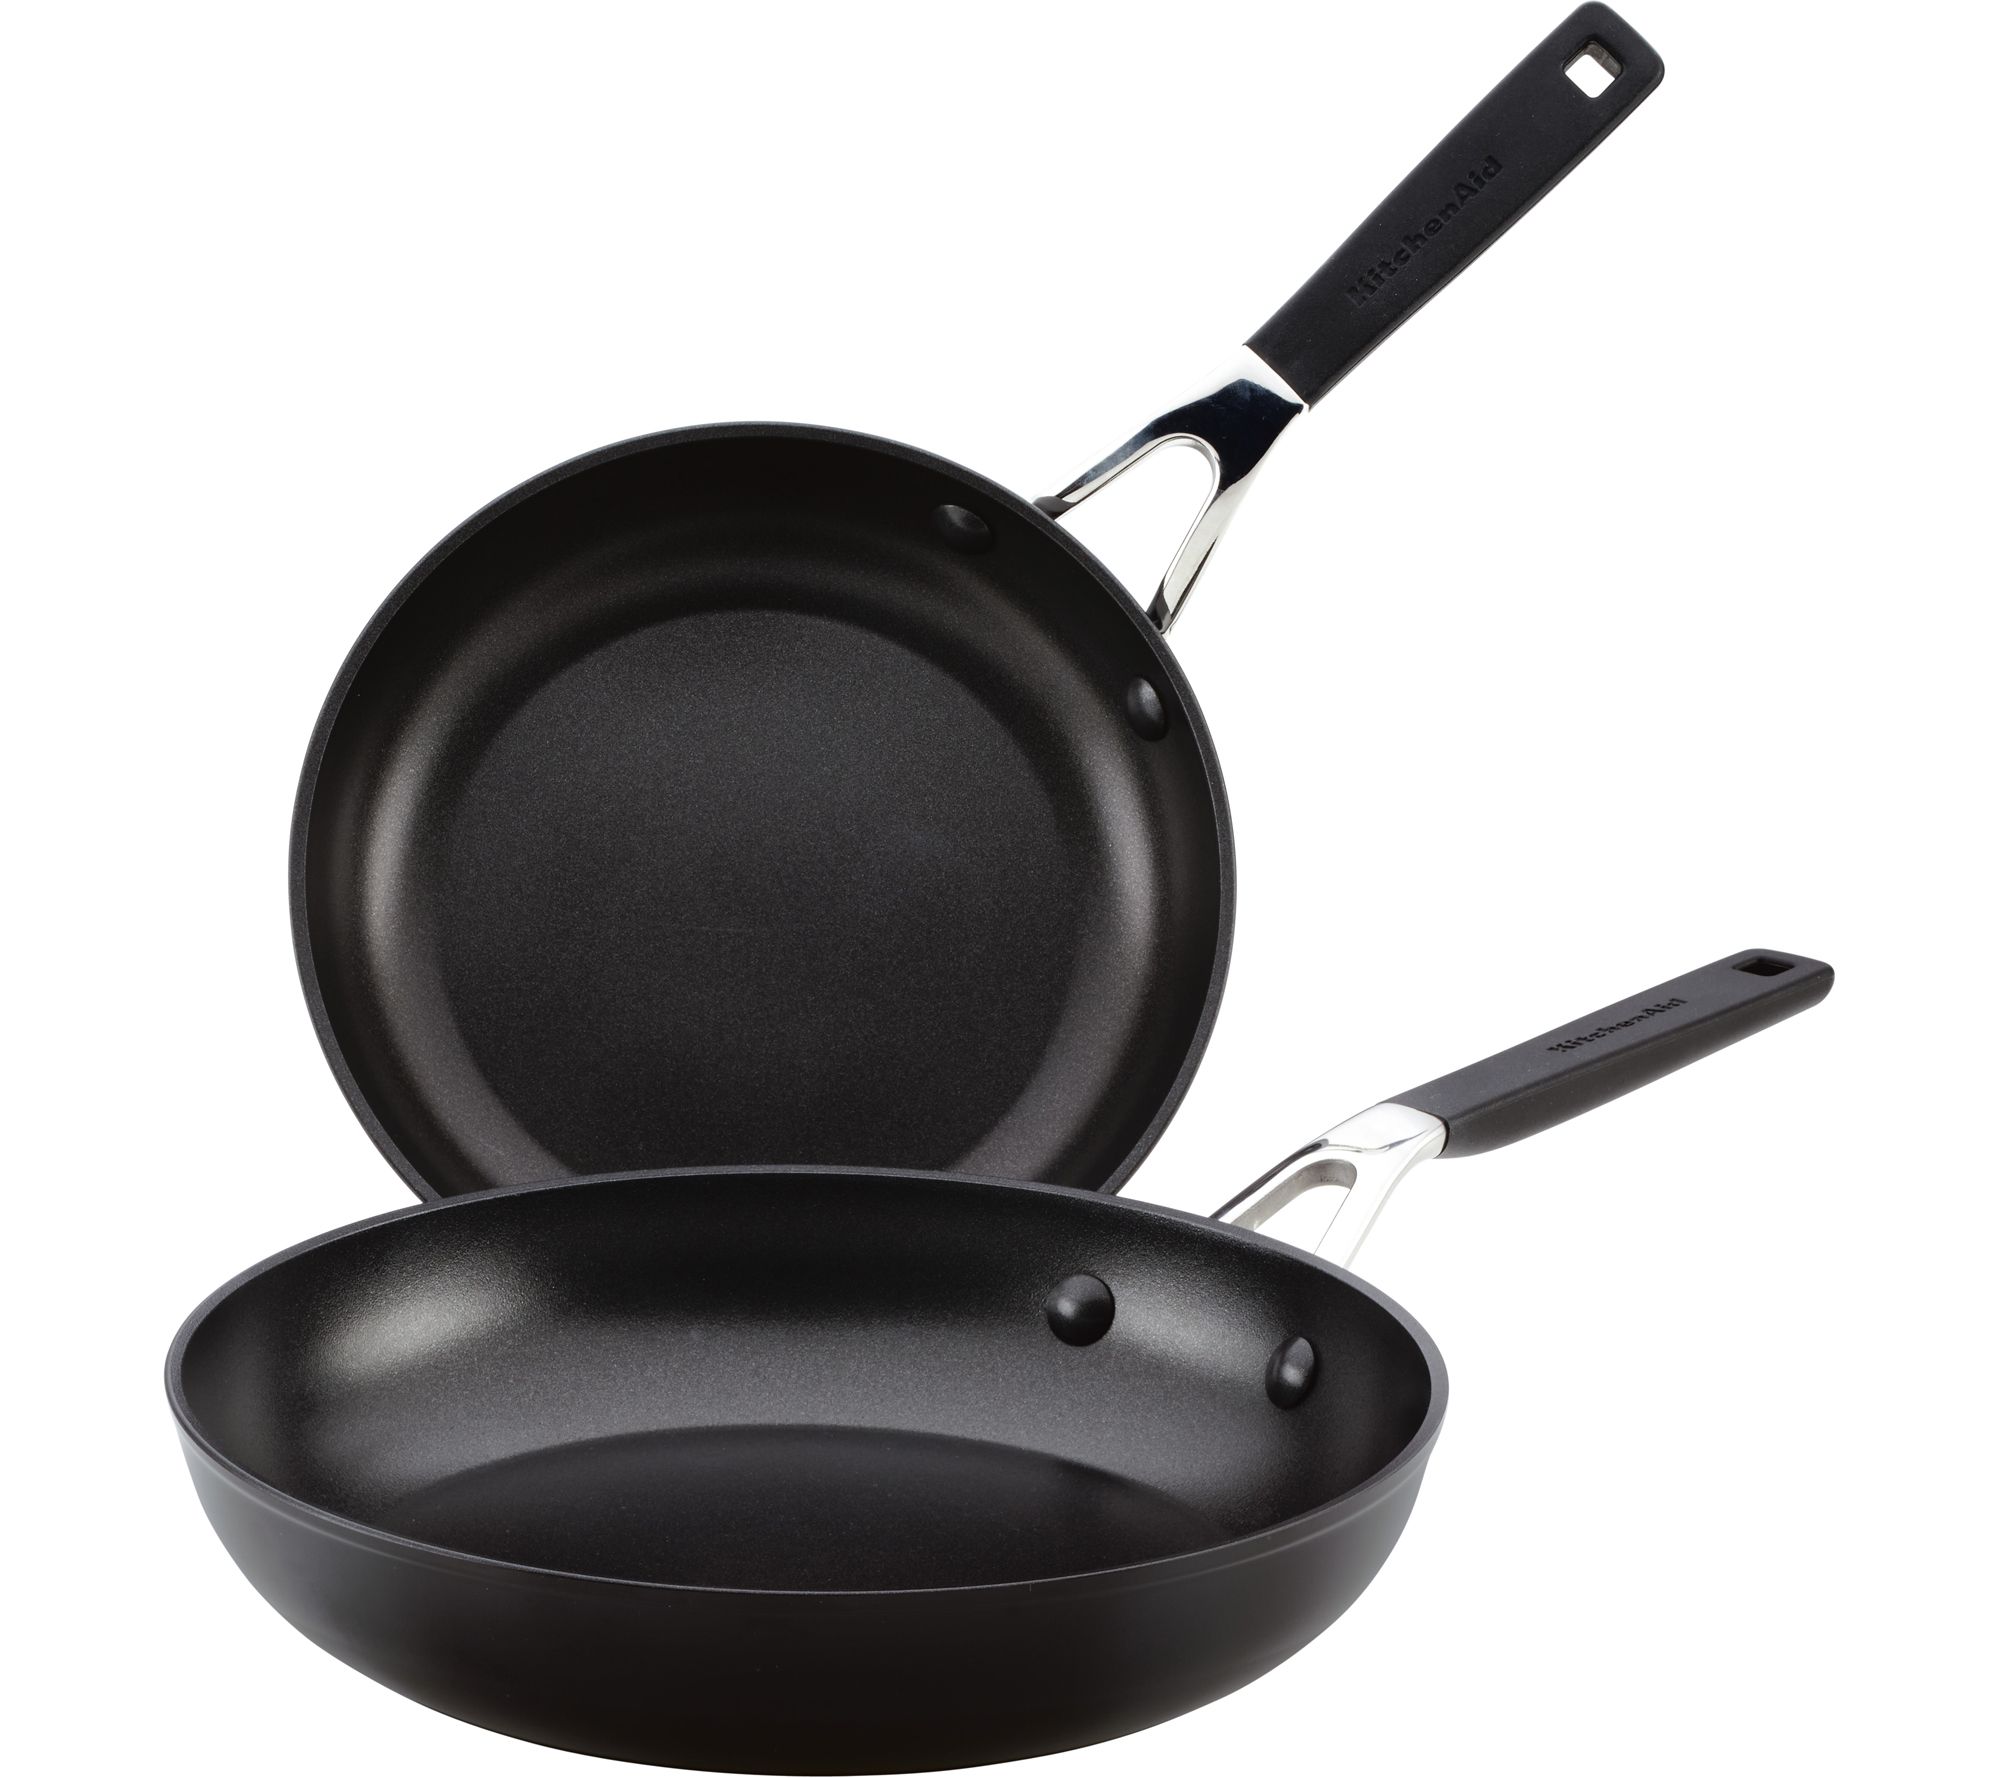 Anolon Advanced Home Hard-Anodized Nonstick Wok with Side Handles and Lid,  14-Inch